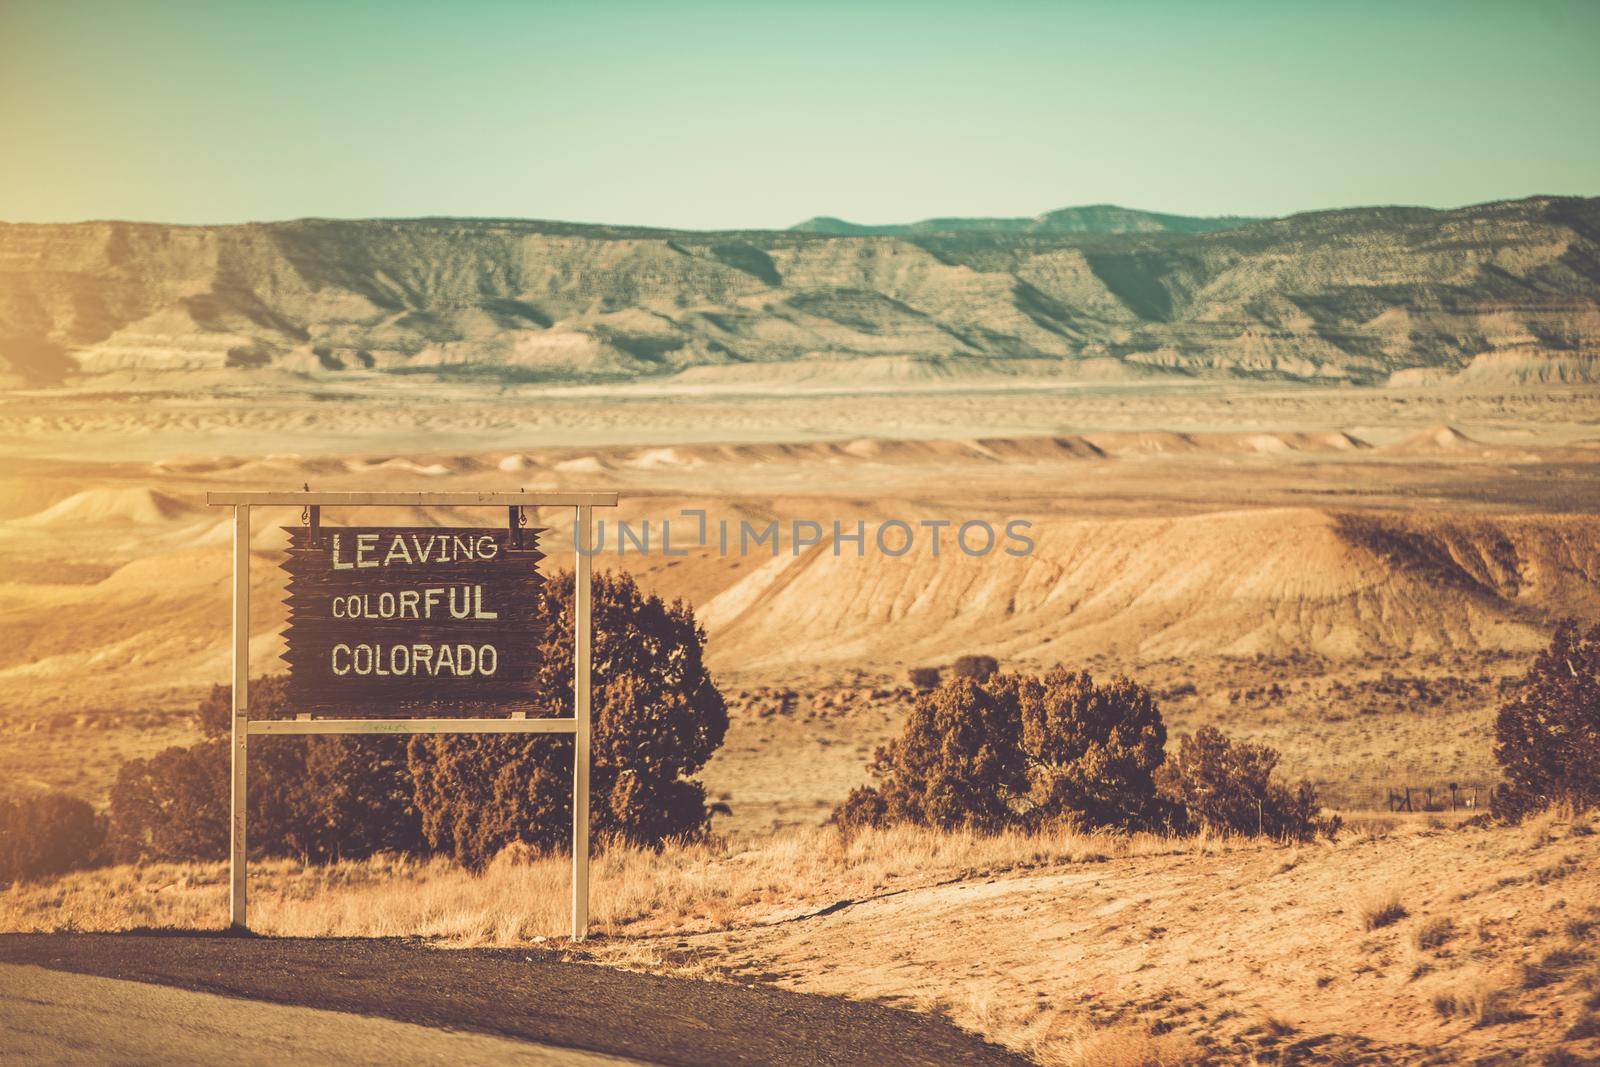 Leaving Colorful Colorado Utah Border Sign by welcomia